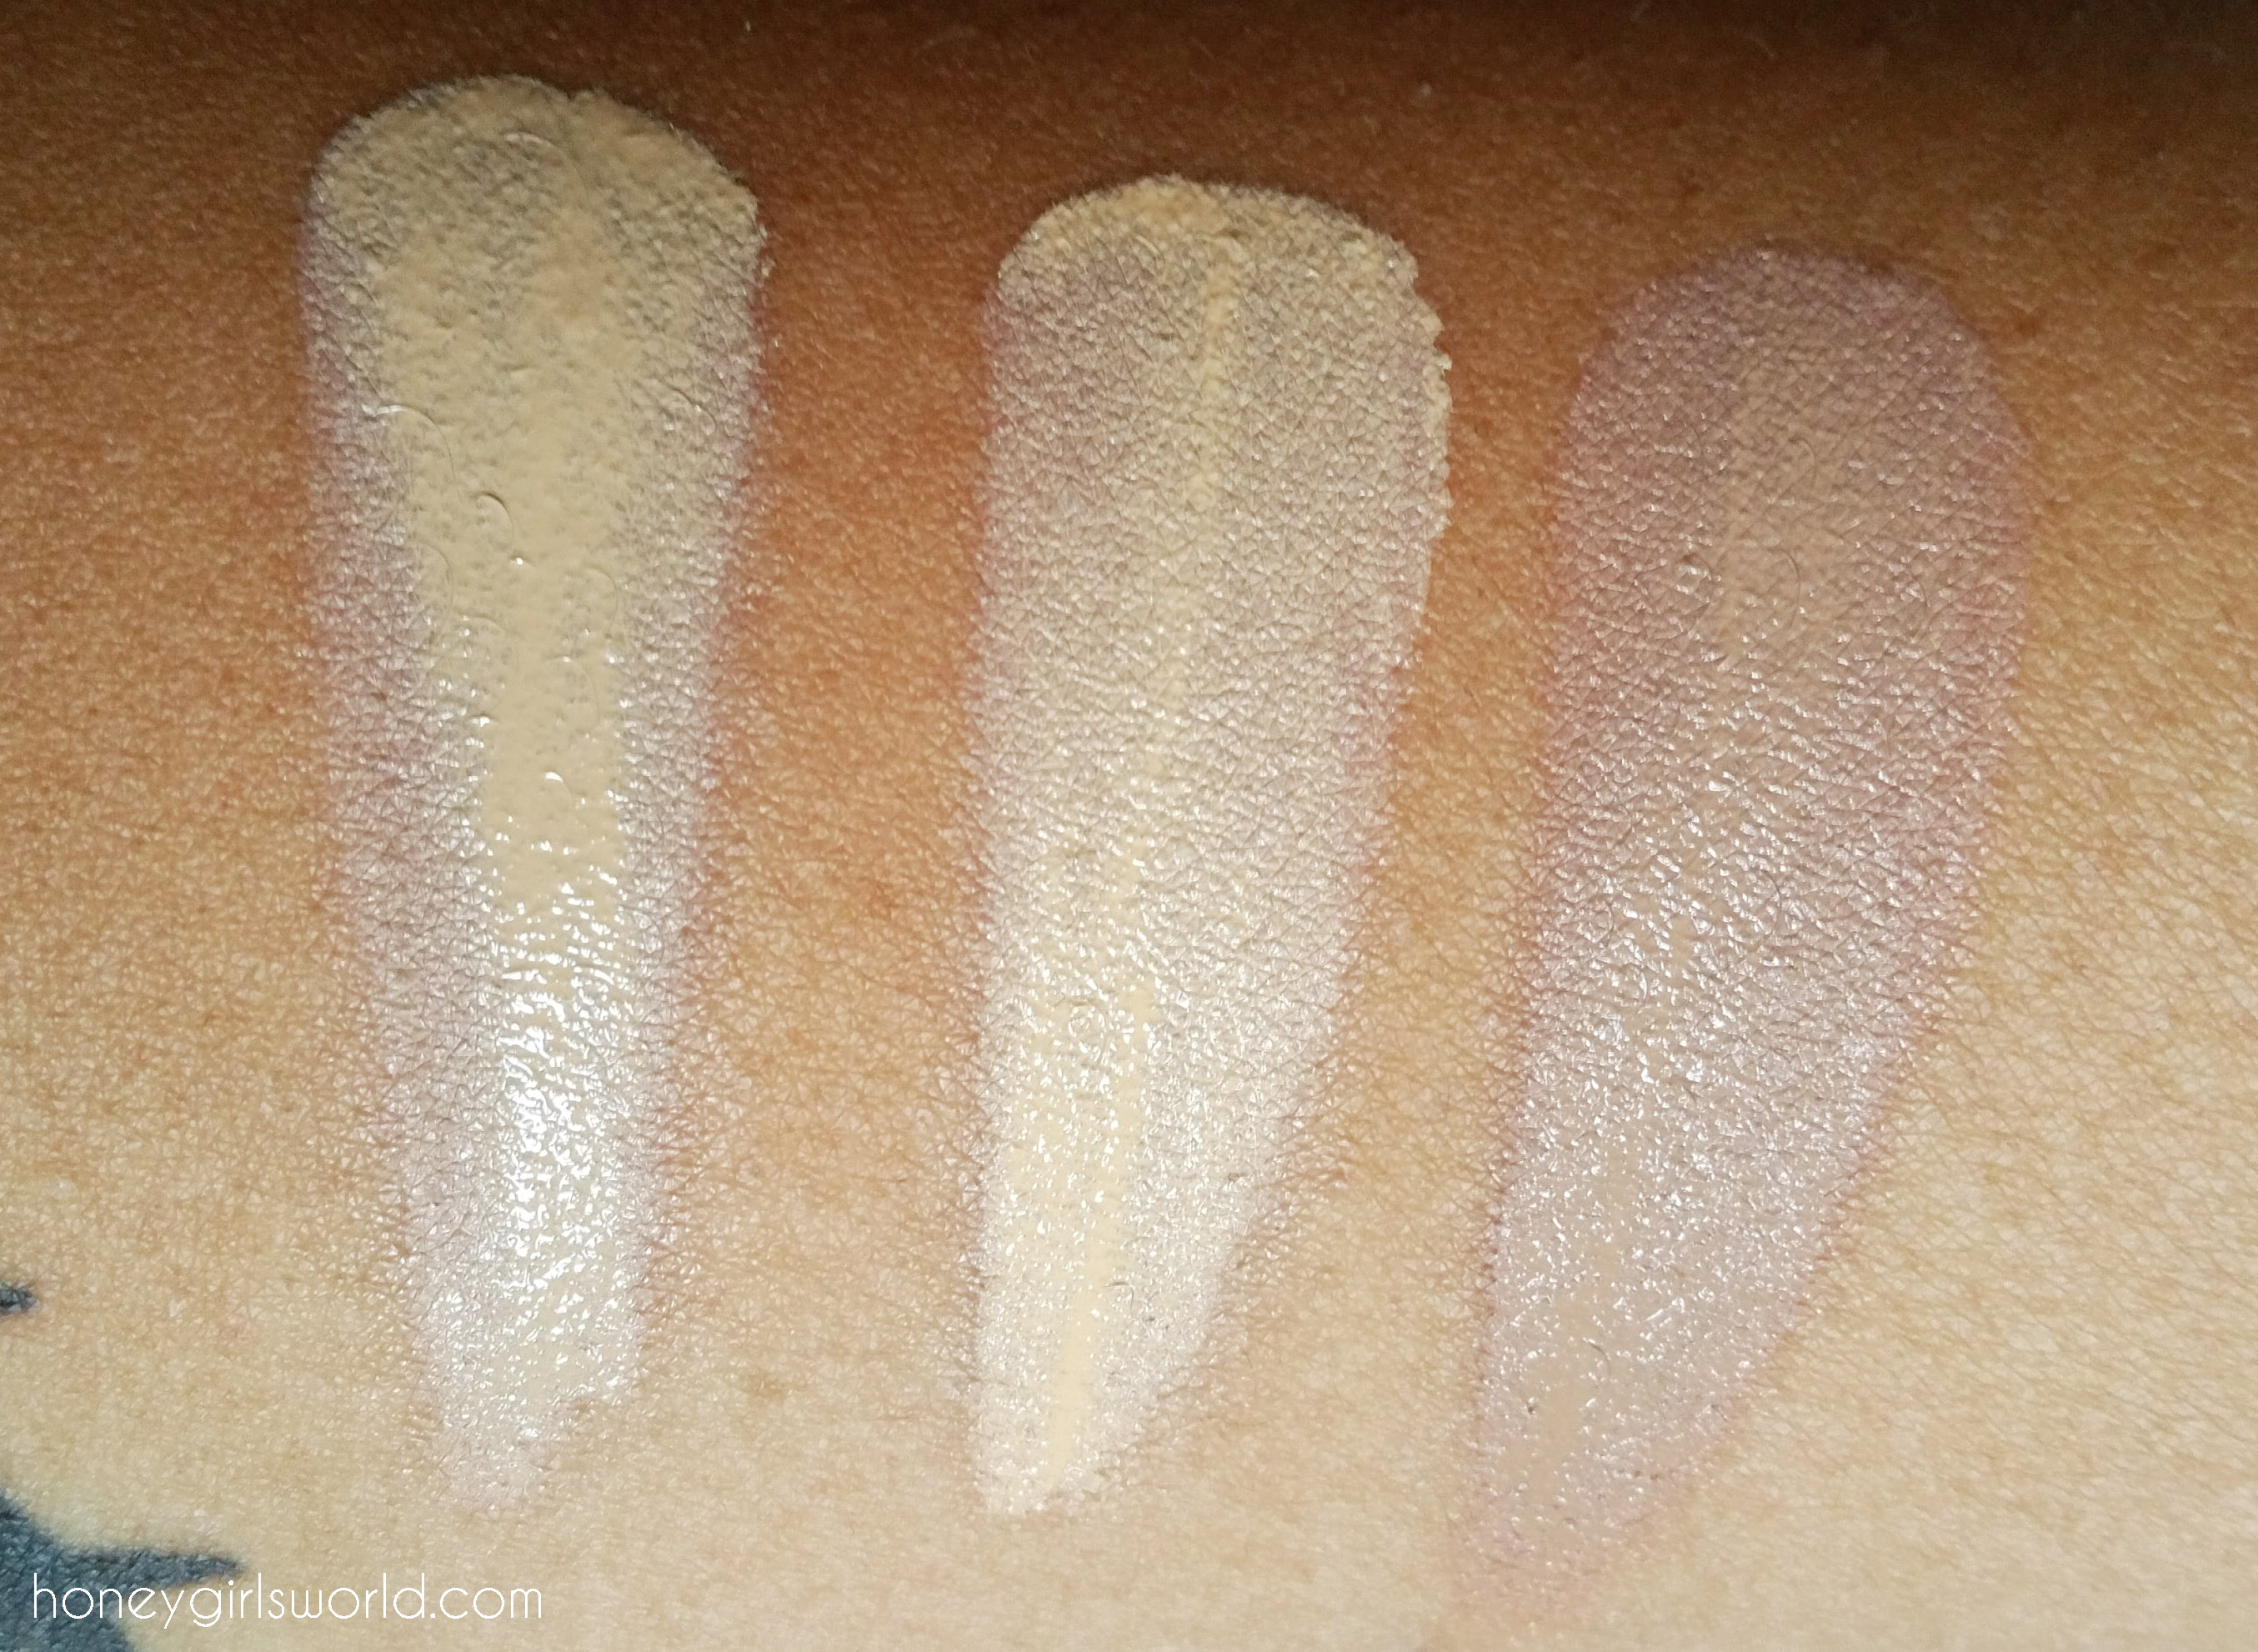 L'Oreal, L'Oreal True Match, L'Oreal True Match Lumi Cushion, L'Oreal True Match Lumi Cushion Buikdable luminous foundation, foundation, face, beauty, review, beauty product, swatches, 